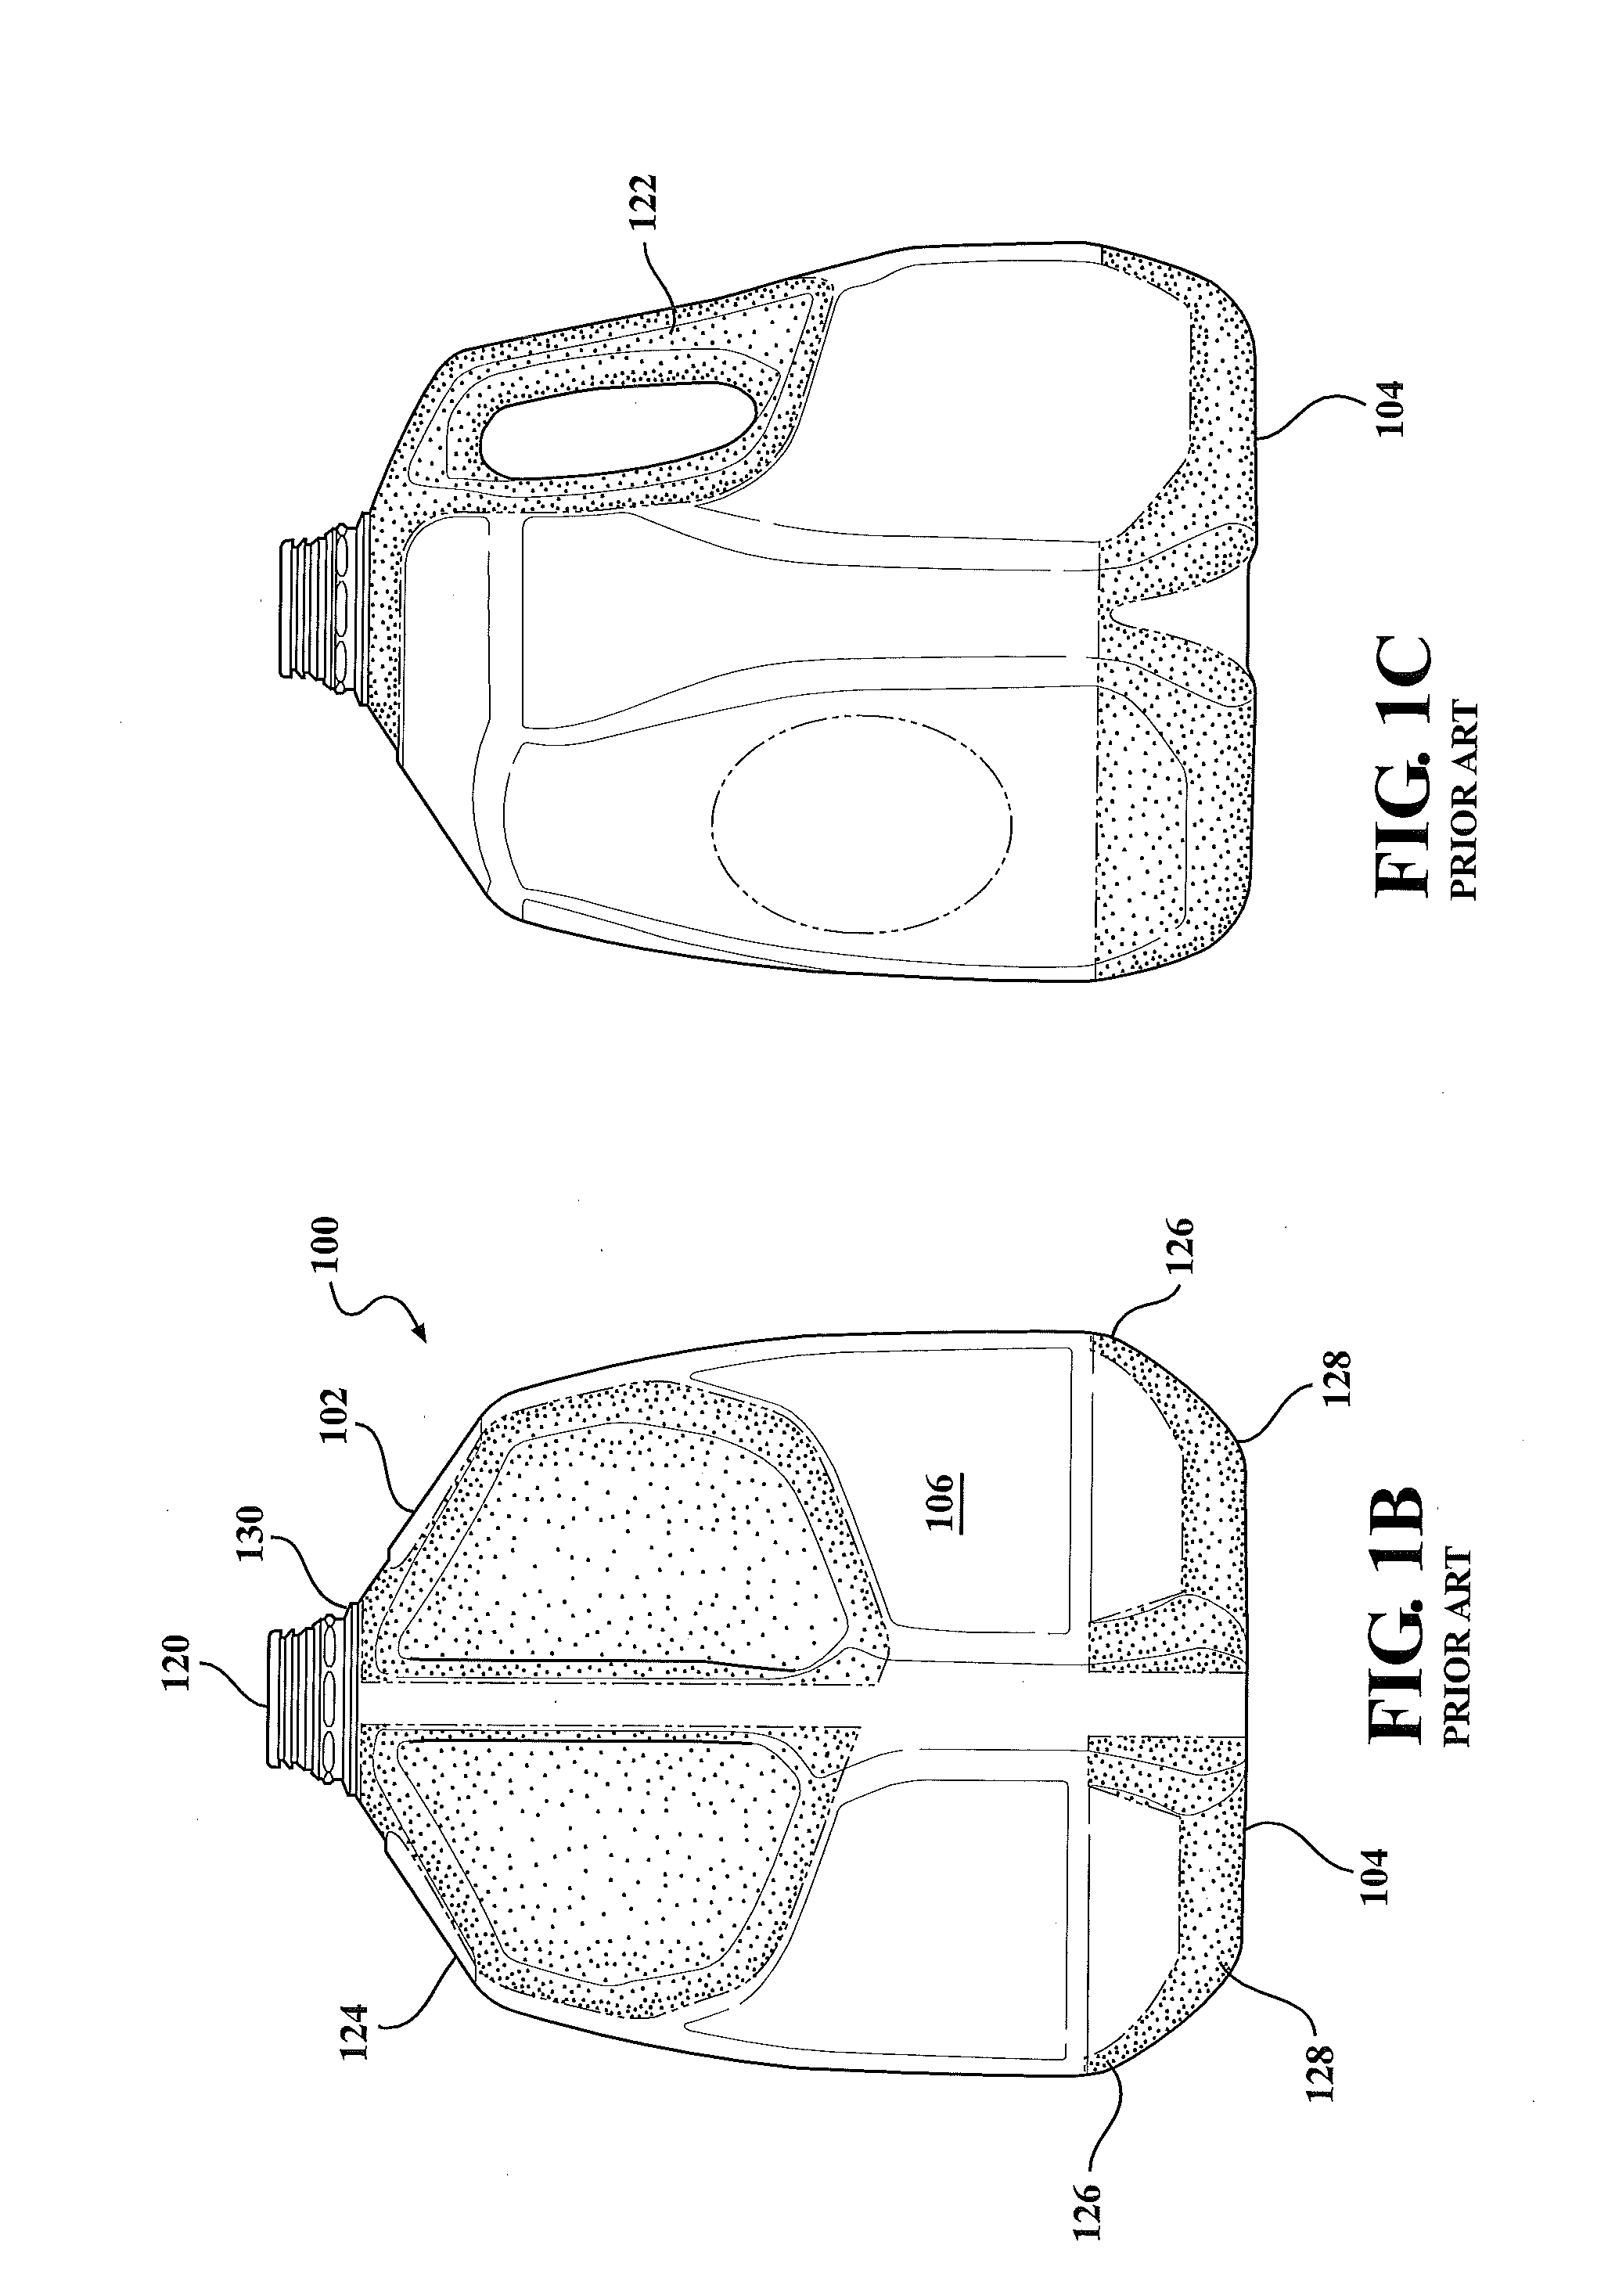 Method and apparatus for making a light weight container